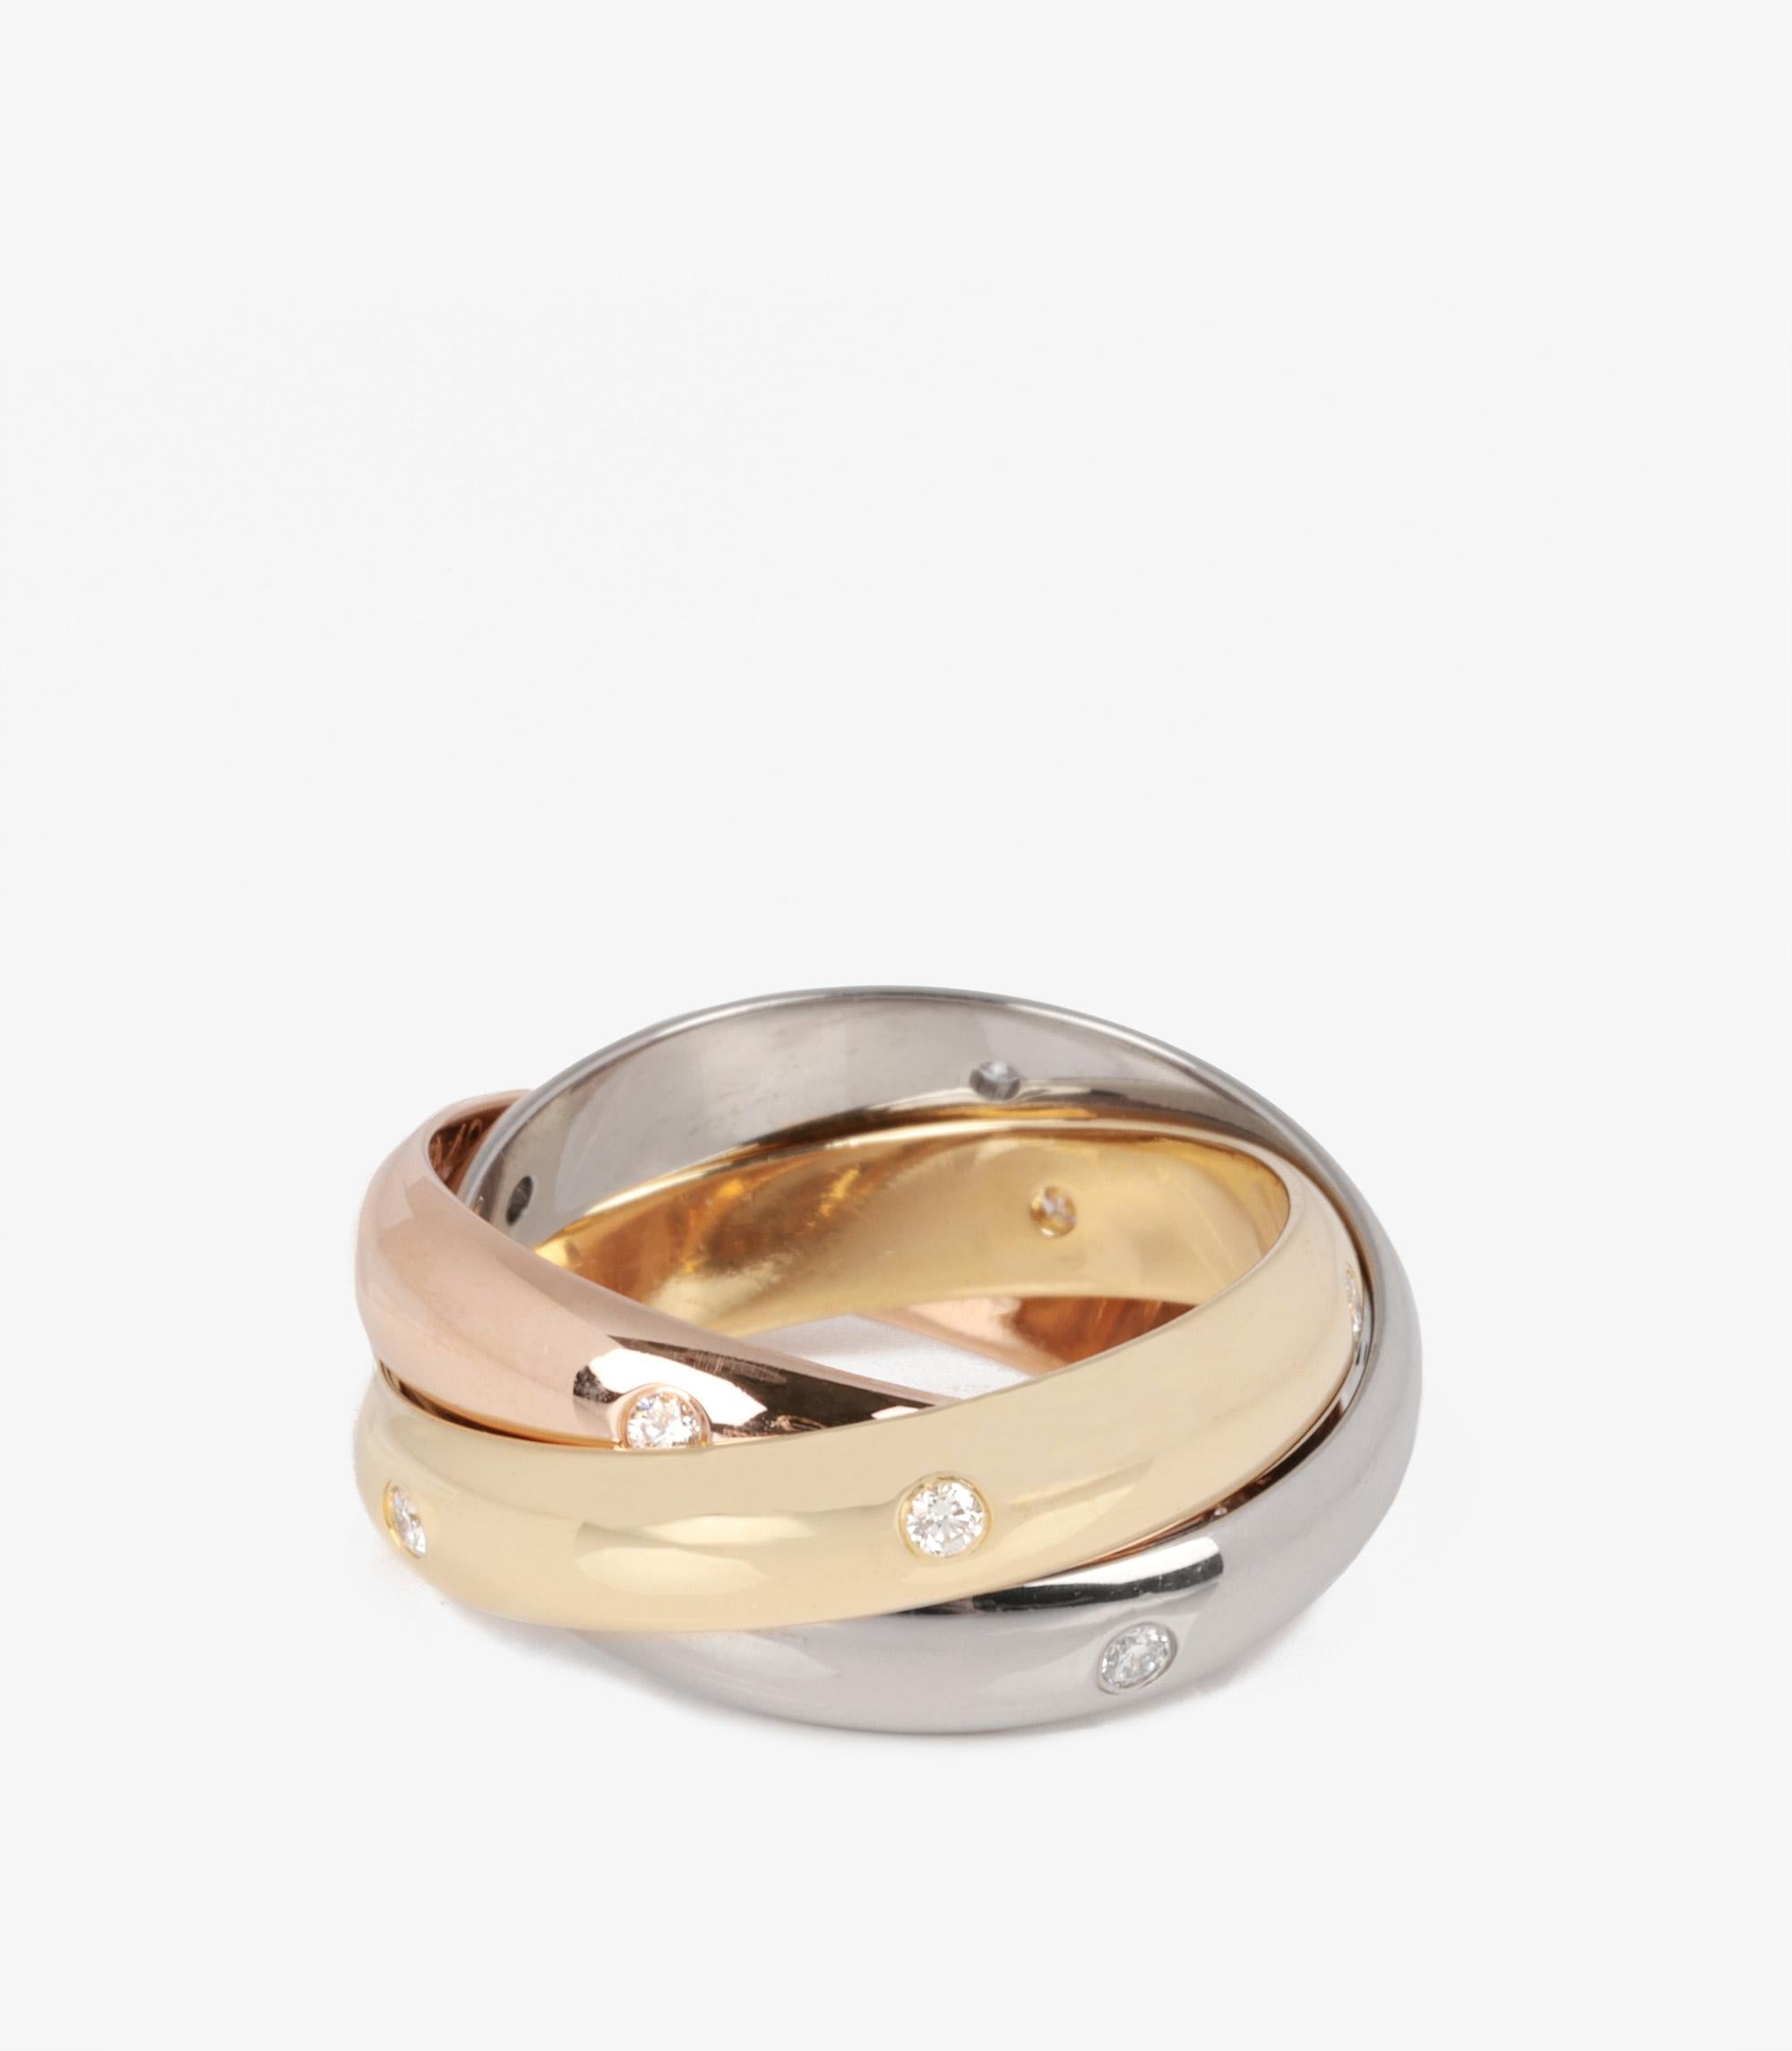 Cartier Diamond Set 18ct White Gold, 18ct Yellow Gold And 18ct Rose Gold Medium Trinity Ring

Brand- Cartier
Model- Diamond Set Medium Trinity Ring
Product Type- Ring
Serial Number- CR****
Age- Circa 2018
Accompanied By- Cartier Box,